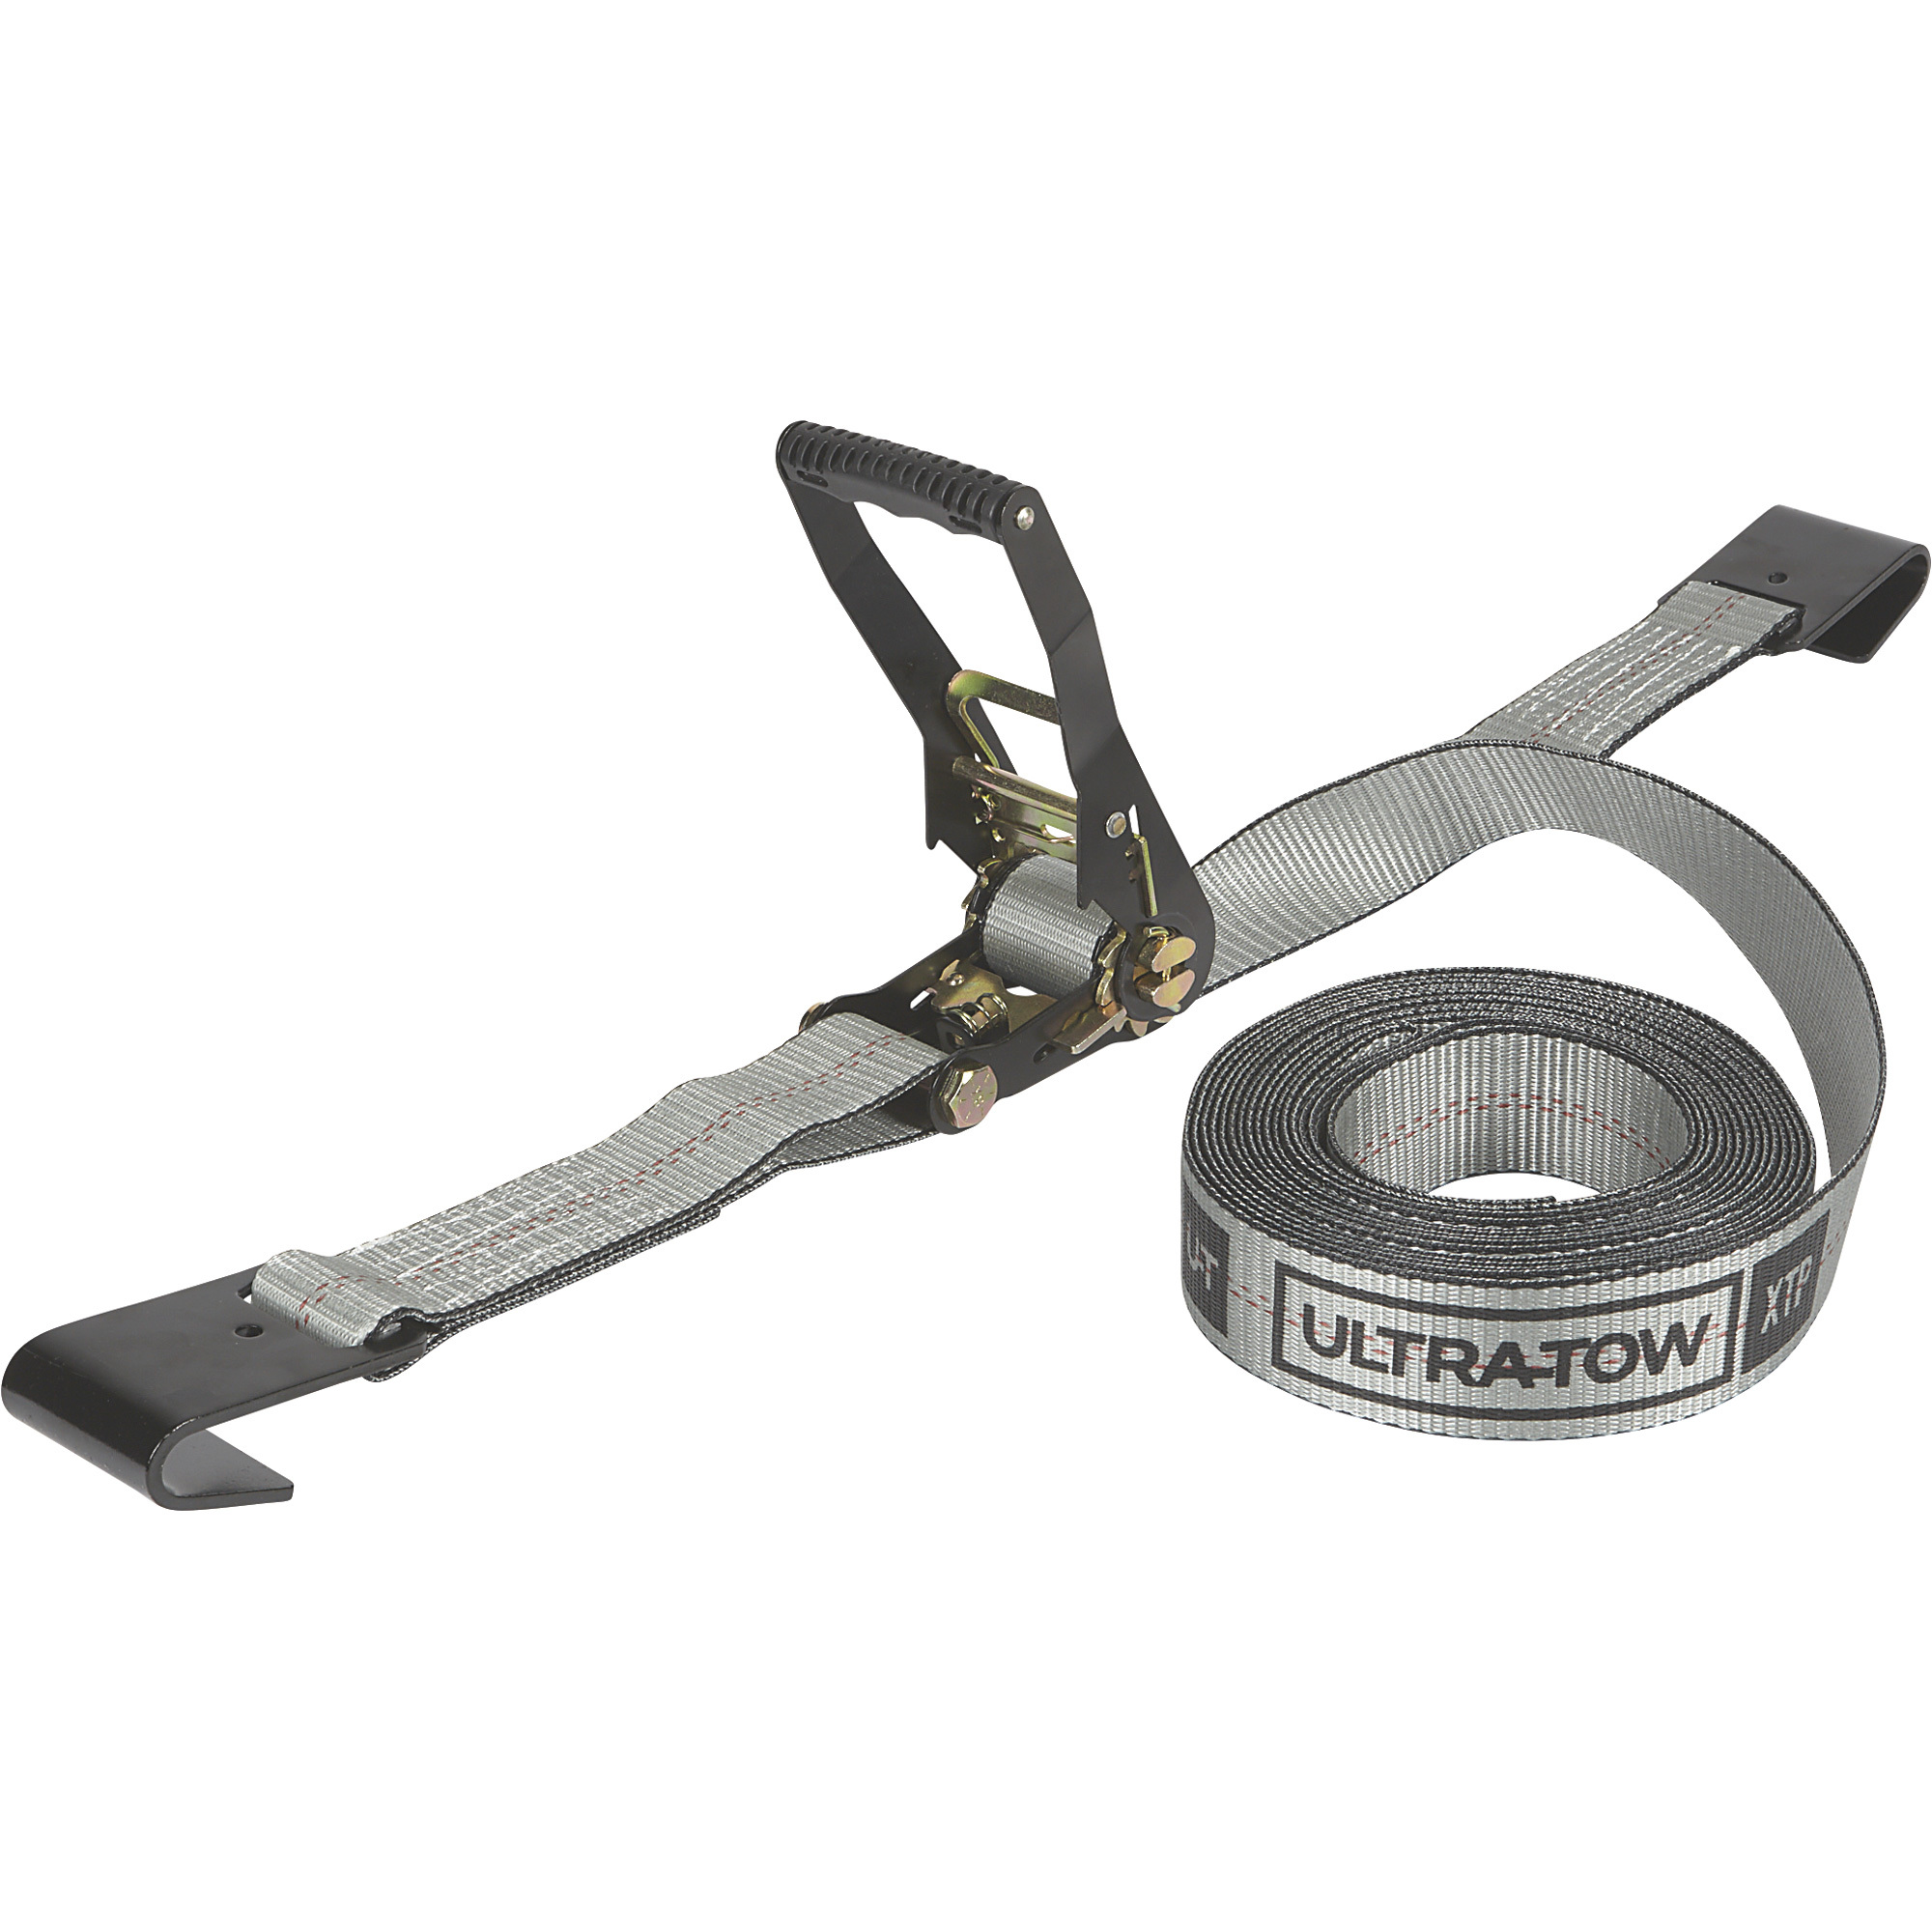 Ultra-Tow XTP 2Inch x 27ft. Ratchet Strap with Flat Hooks, 10,000-Lb. Breaking Strength, 3,300-Lb. Working Load, Gray, Model A810302